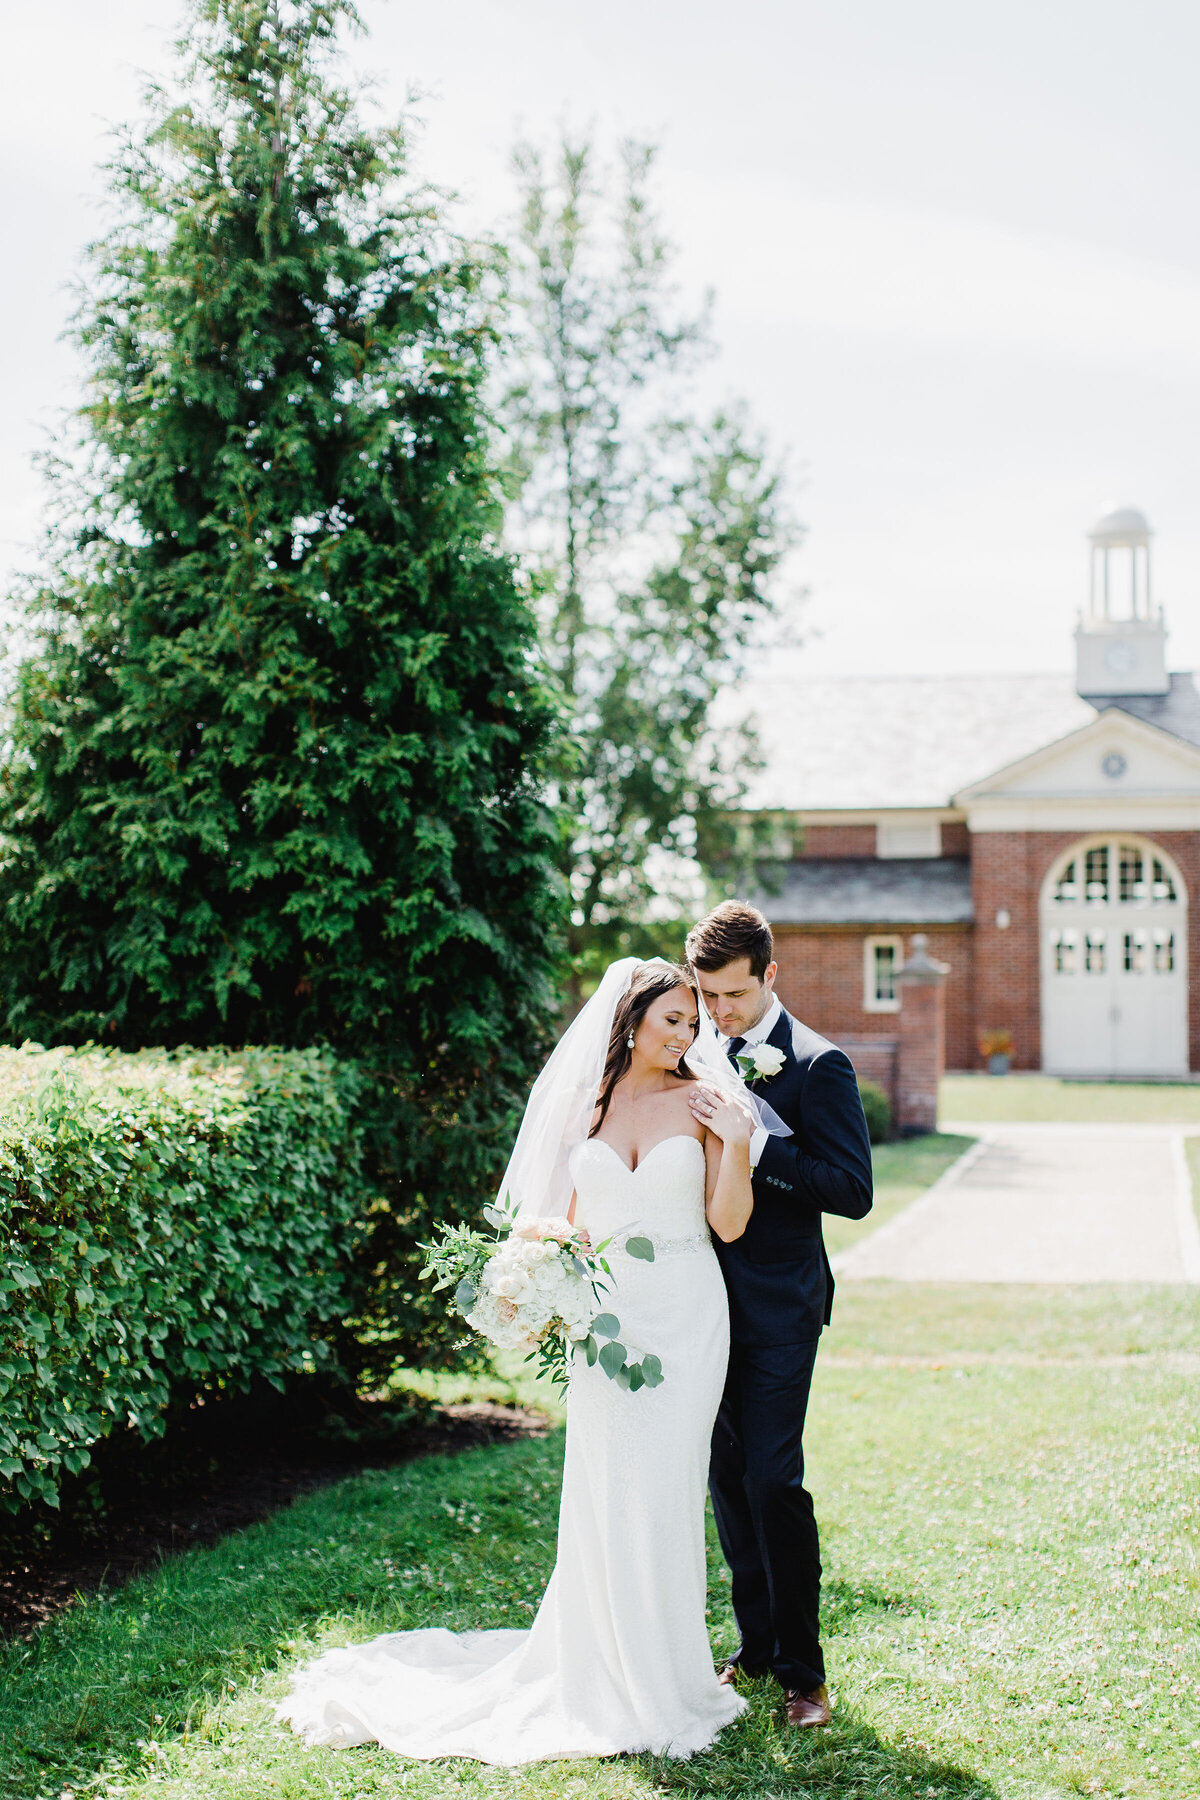 Bride and groom in a romantic embrace at Elawa Farm, surrounded by natural beauty and rustic charm, capturing their love and the venue's serenity